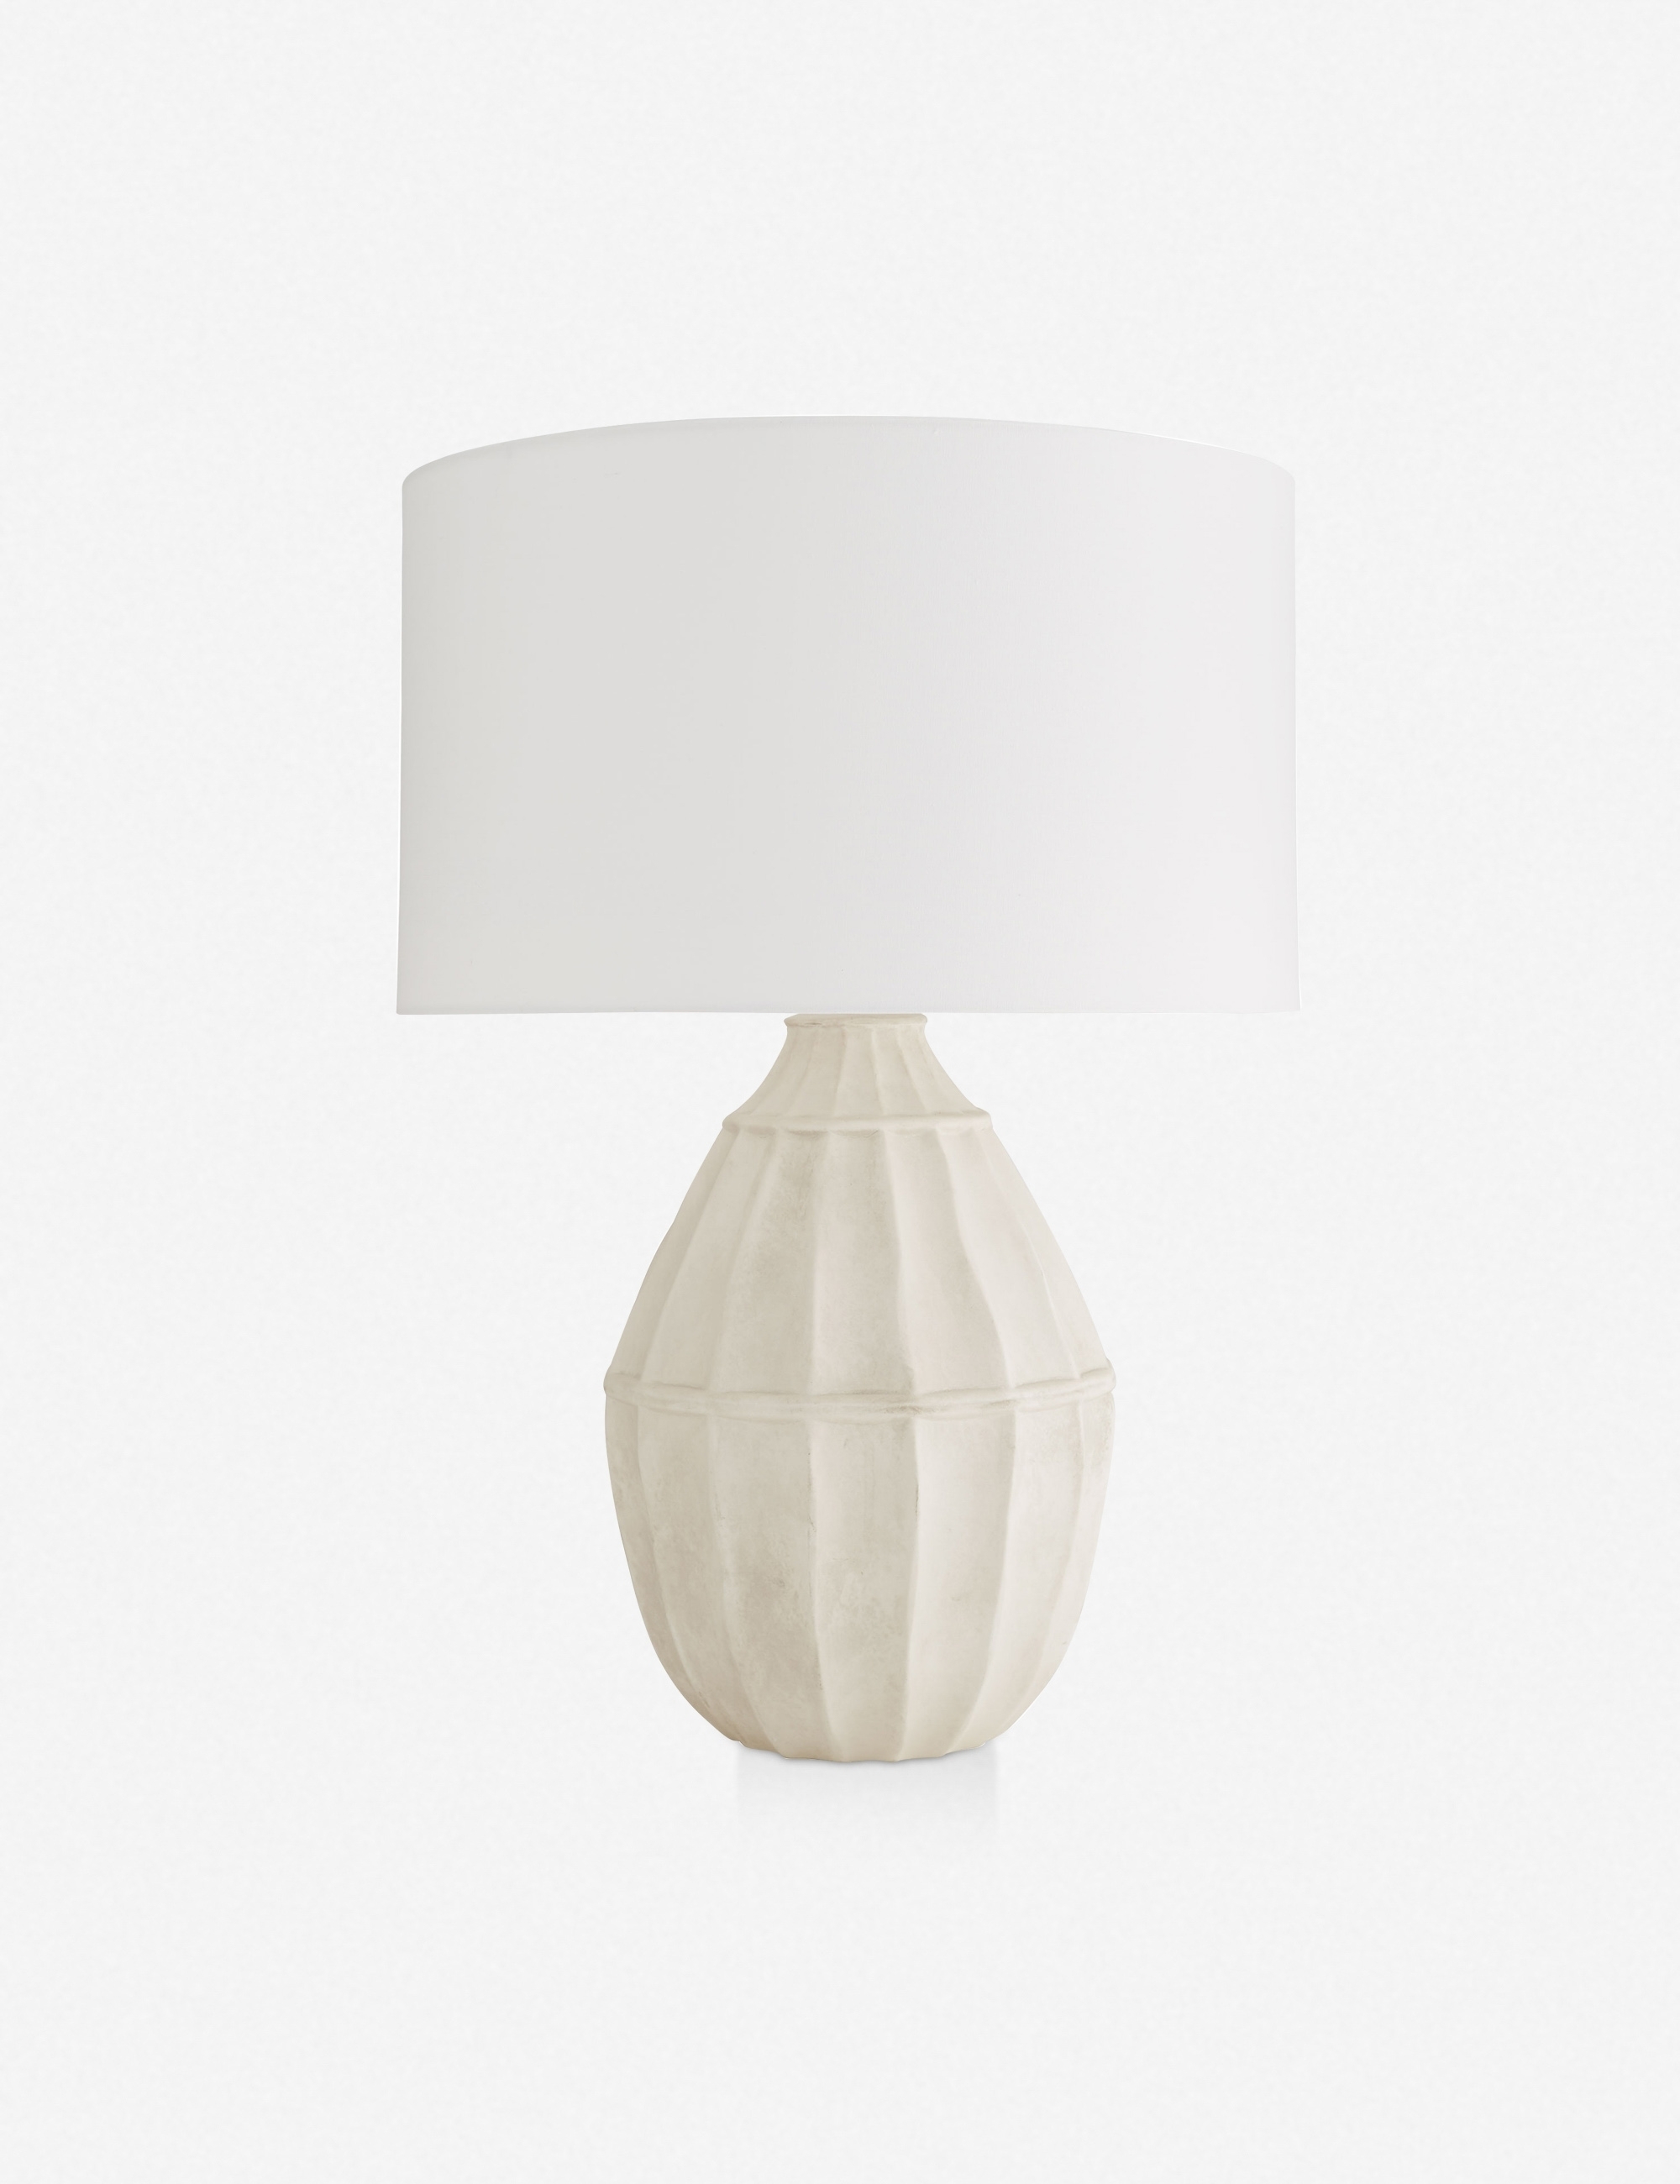 Tangier Table Lamp by Beth Webb for Arteriors - Image 0